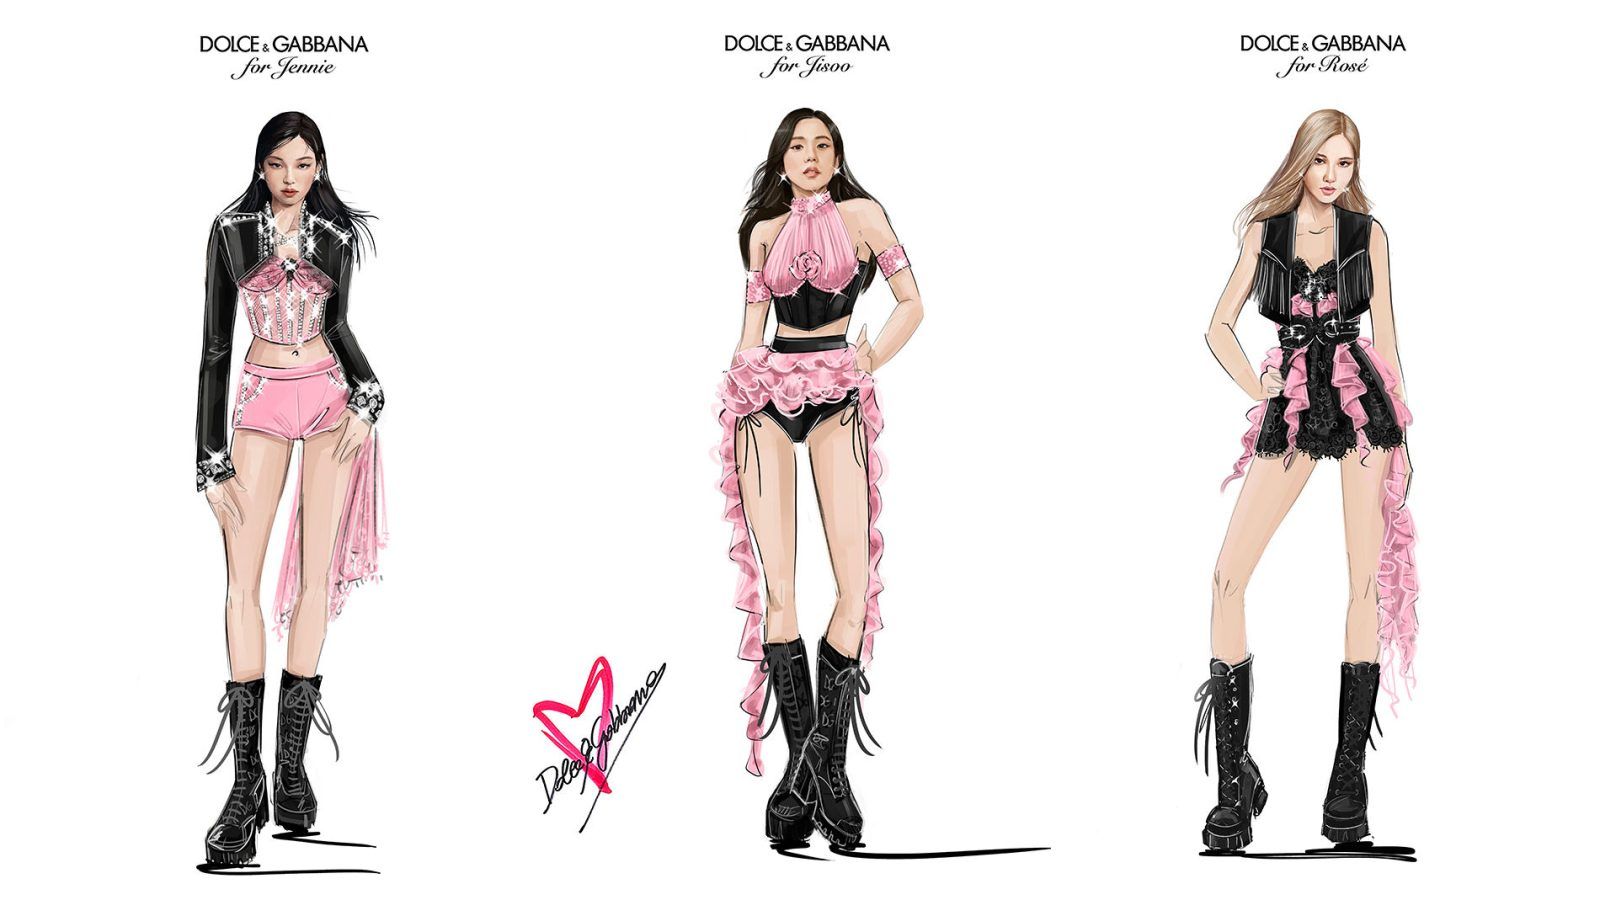 A closer look at the D&G Coachella outfits for Blackpink's Jennie